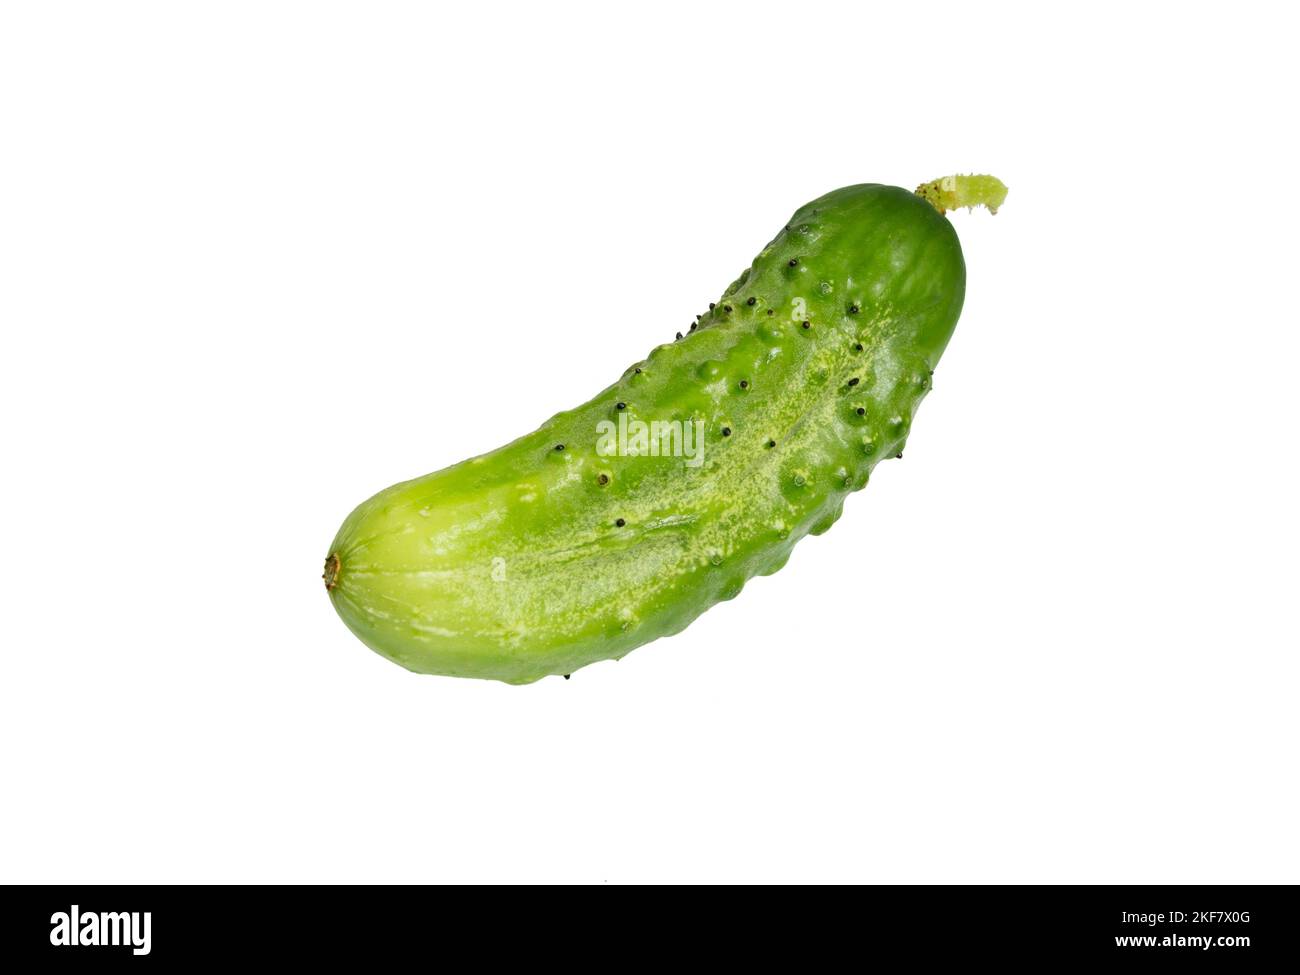 Cucumber. Fresh green cucumber isolated on white background. Natural vegetables organic food. Stock Photo